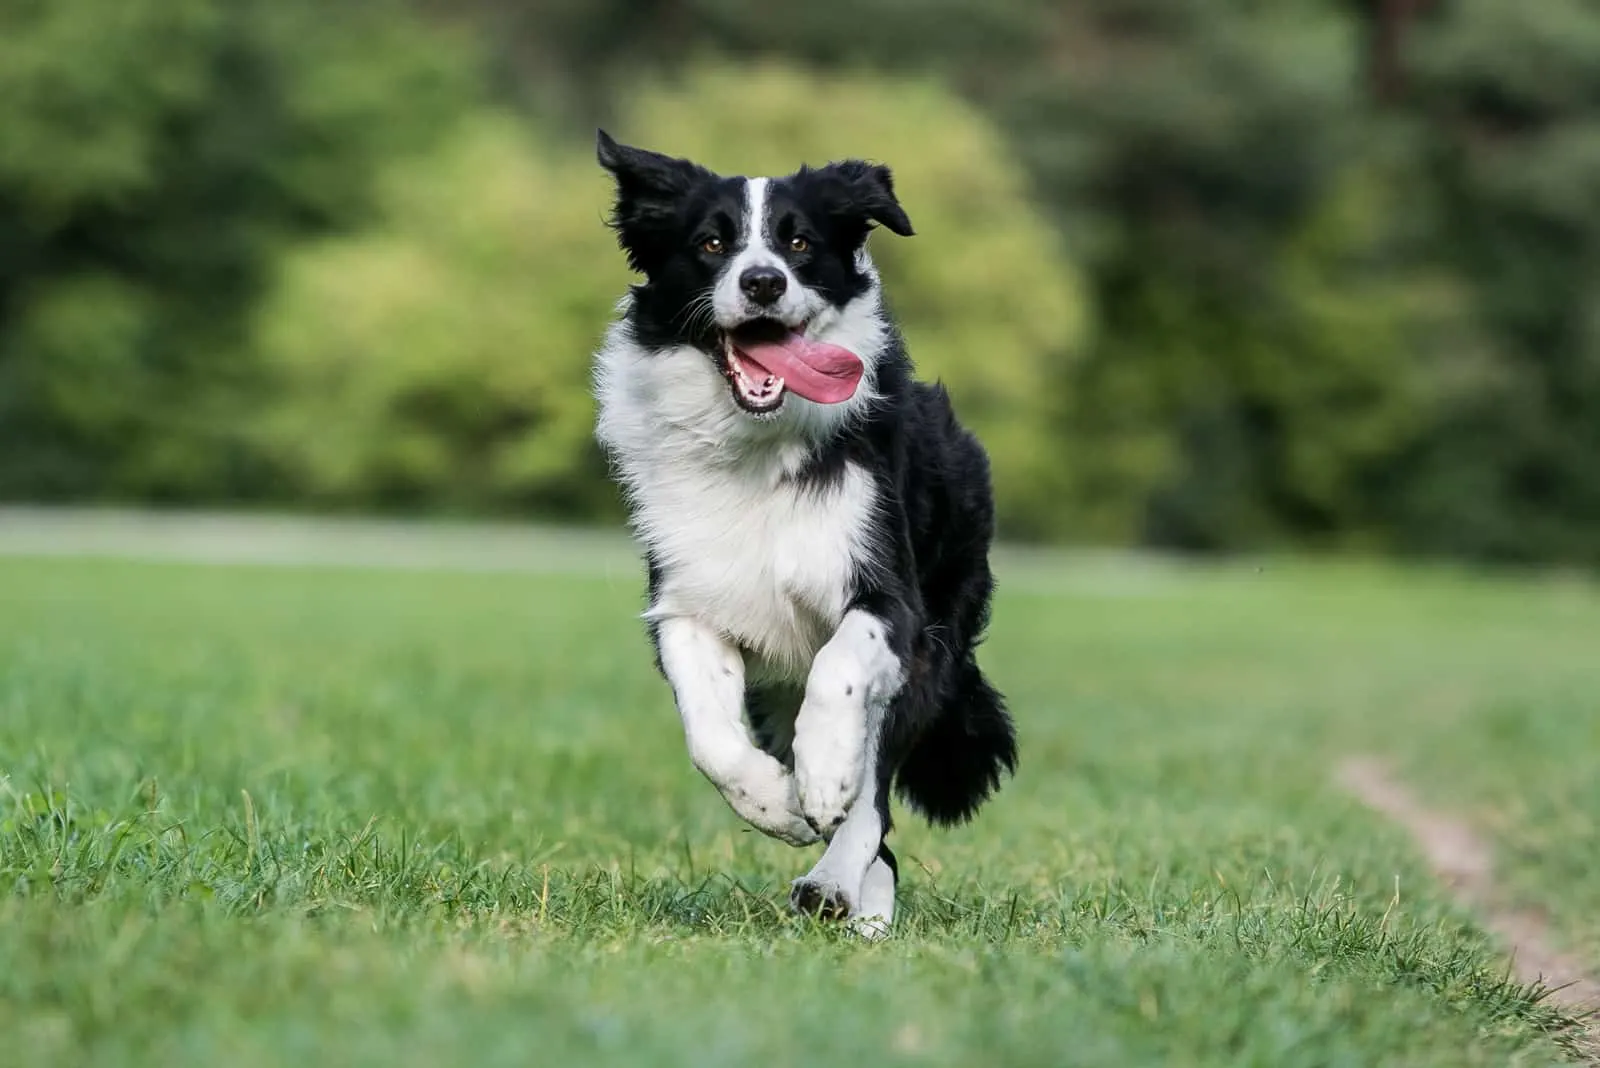 Collie running on grass outside